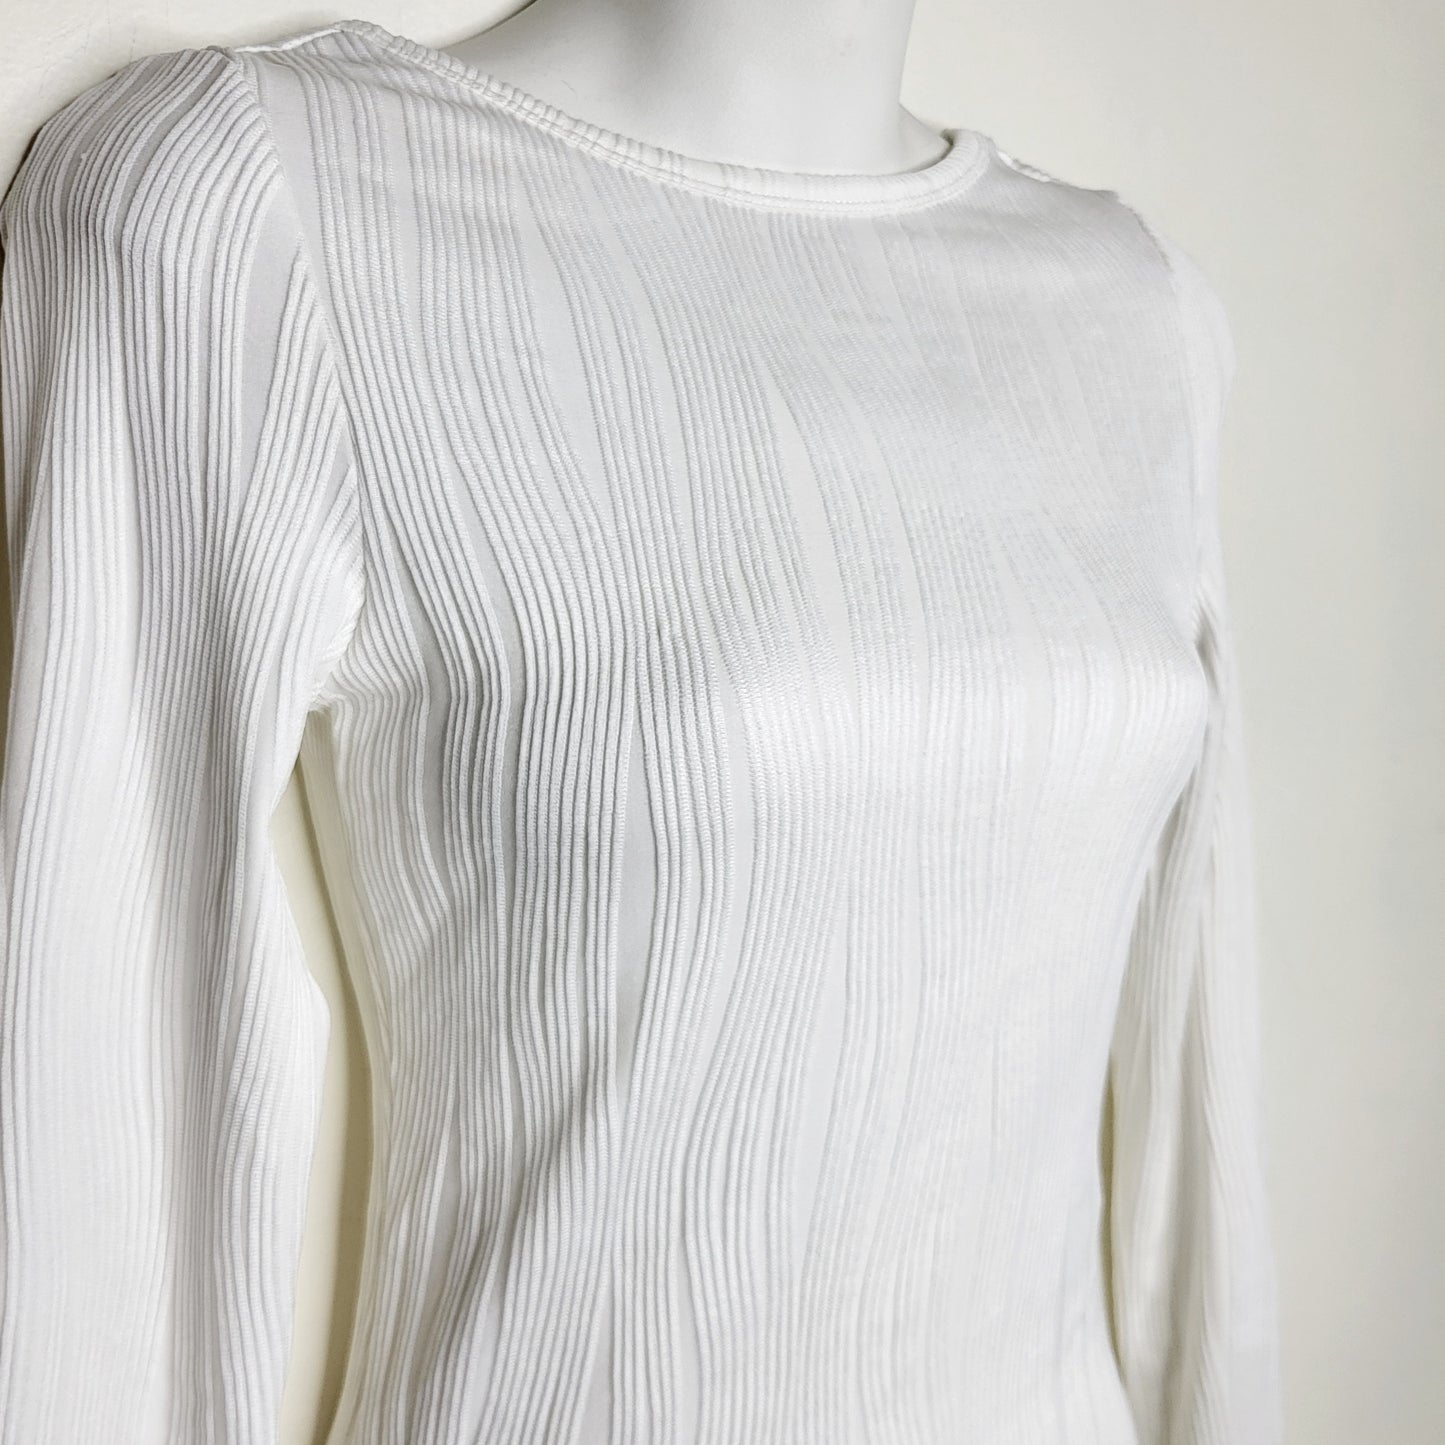 CHND2 - NEW - Dynamite white open back textured long sleeved top, size XS